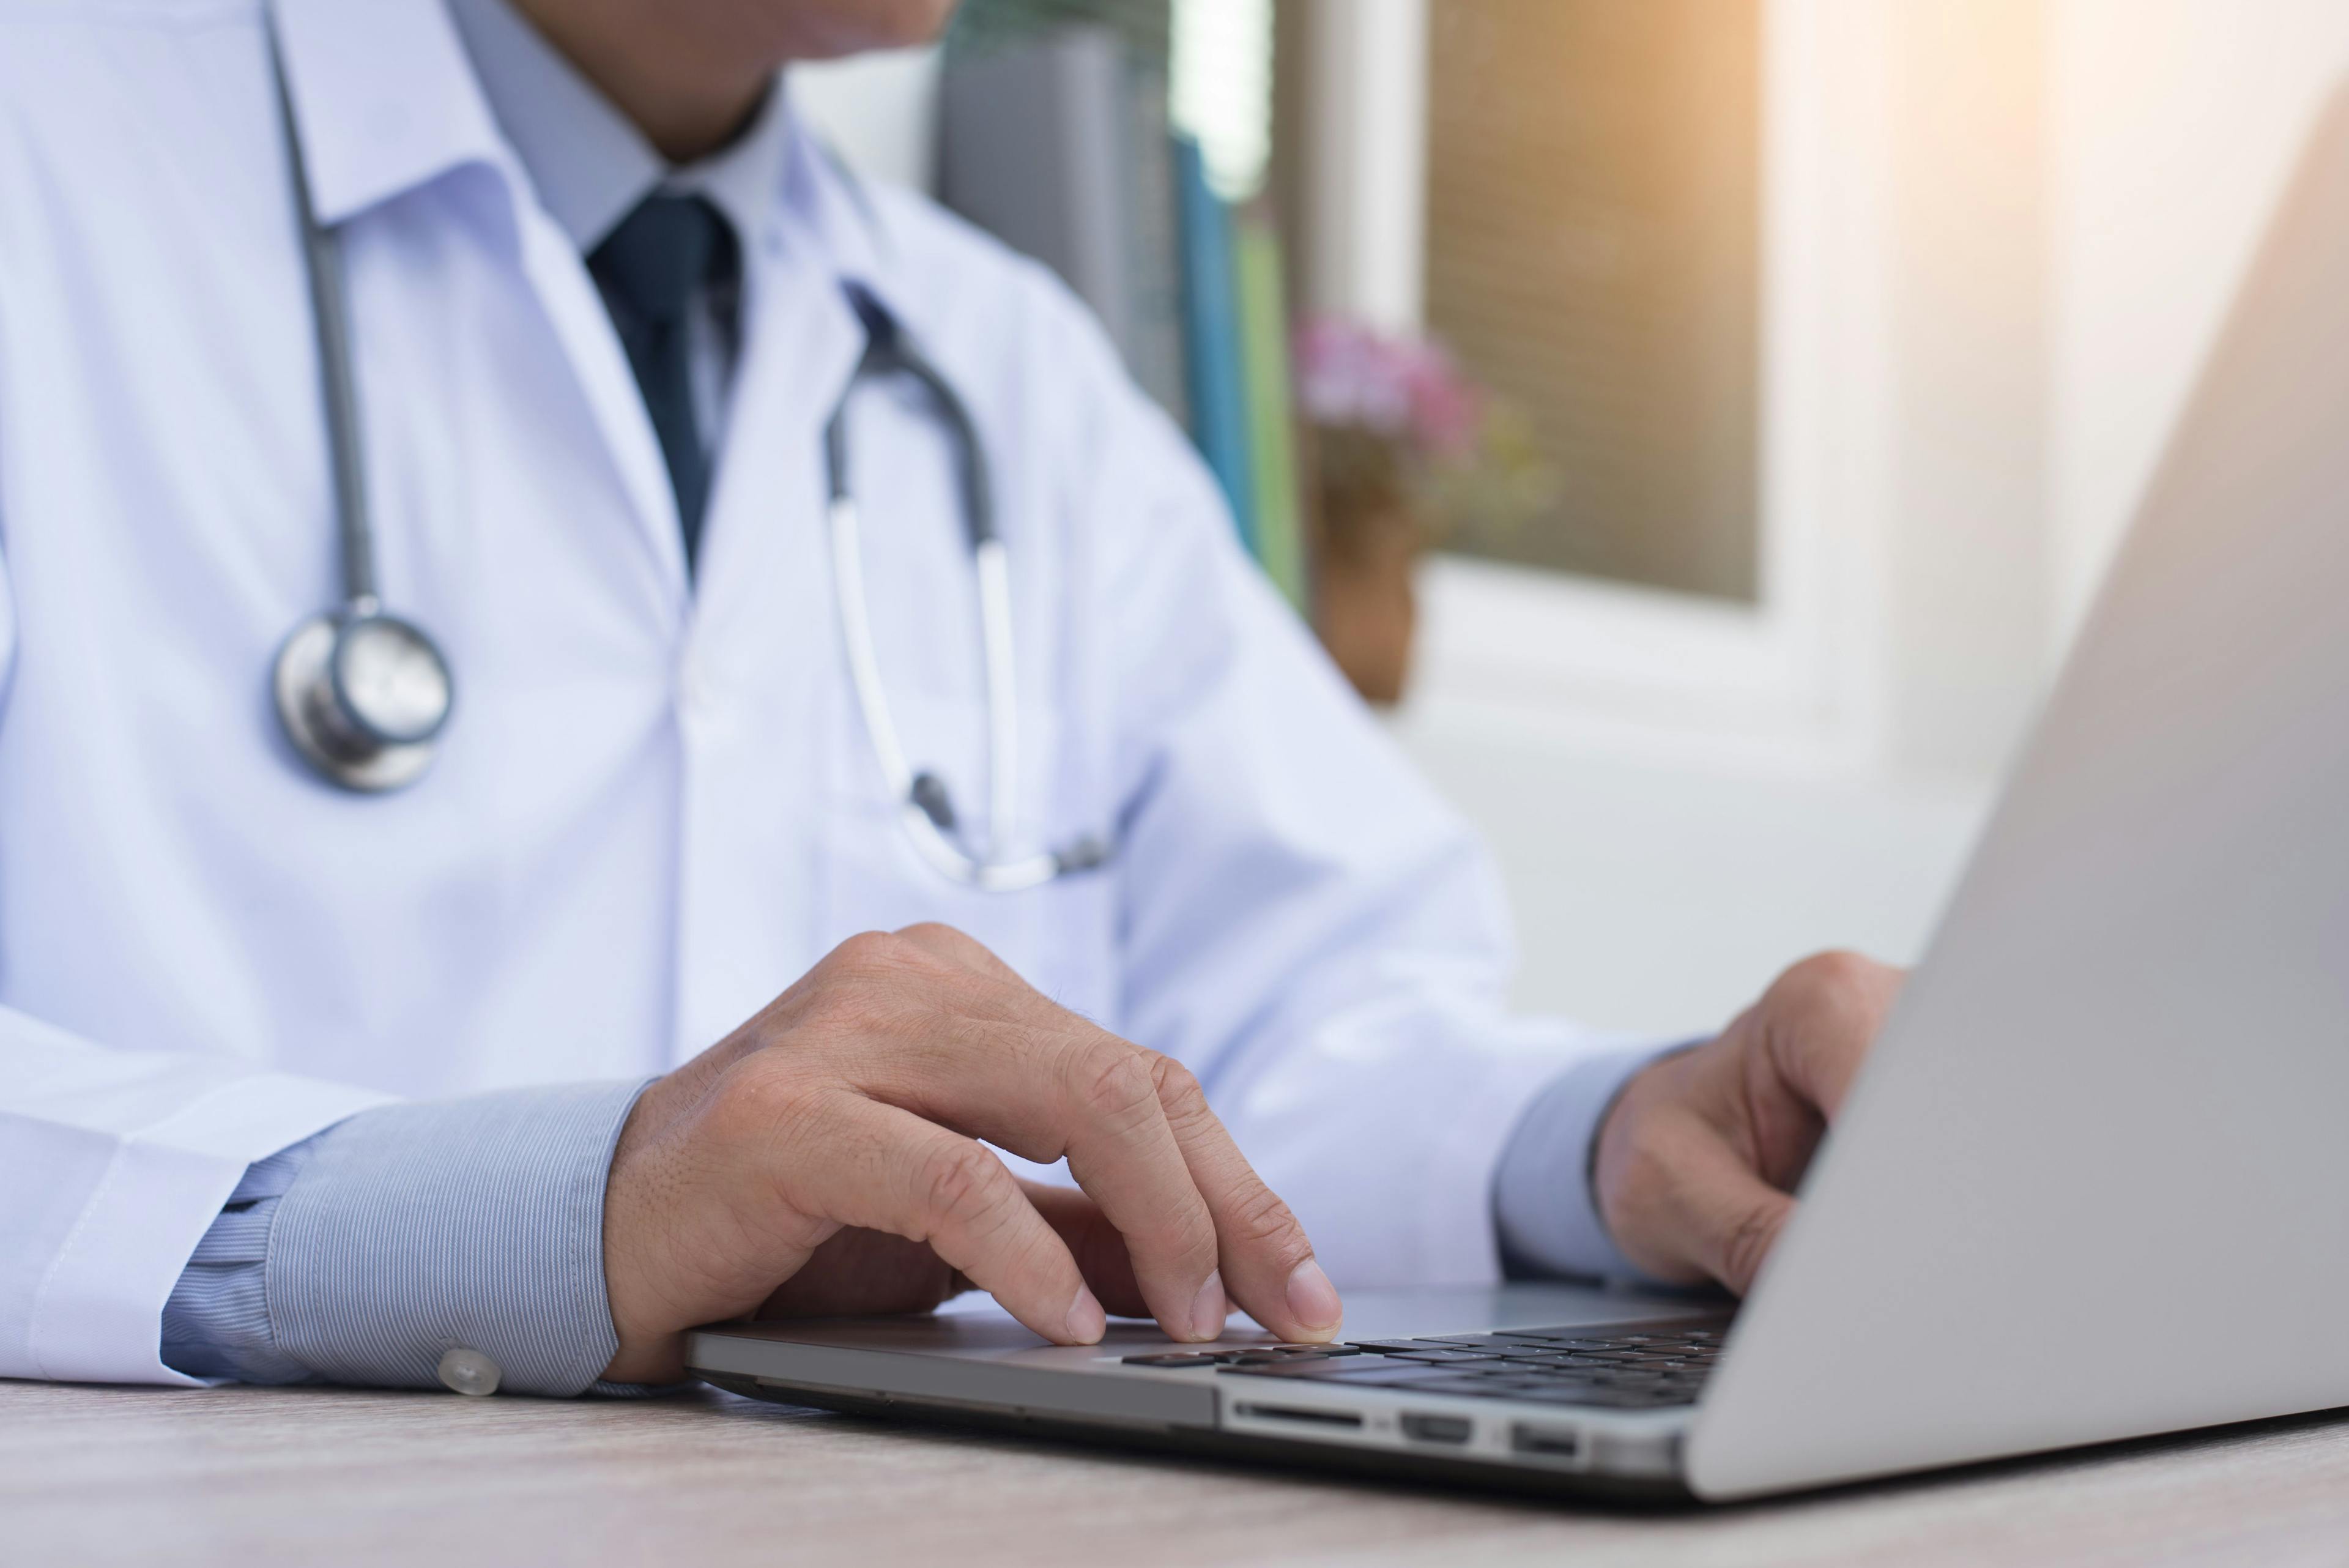 ASCO Submits Comments to Congress Supporting Advanced Measures to Facilitate Telehealth Access